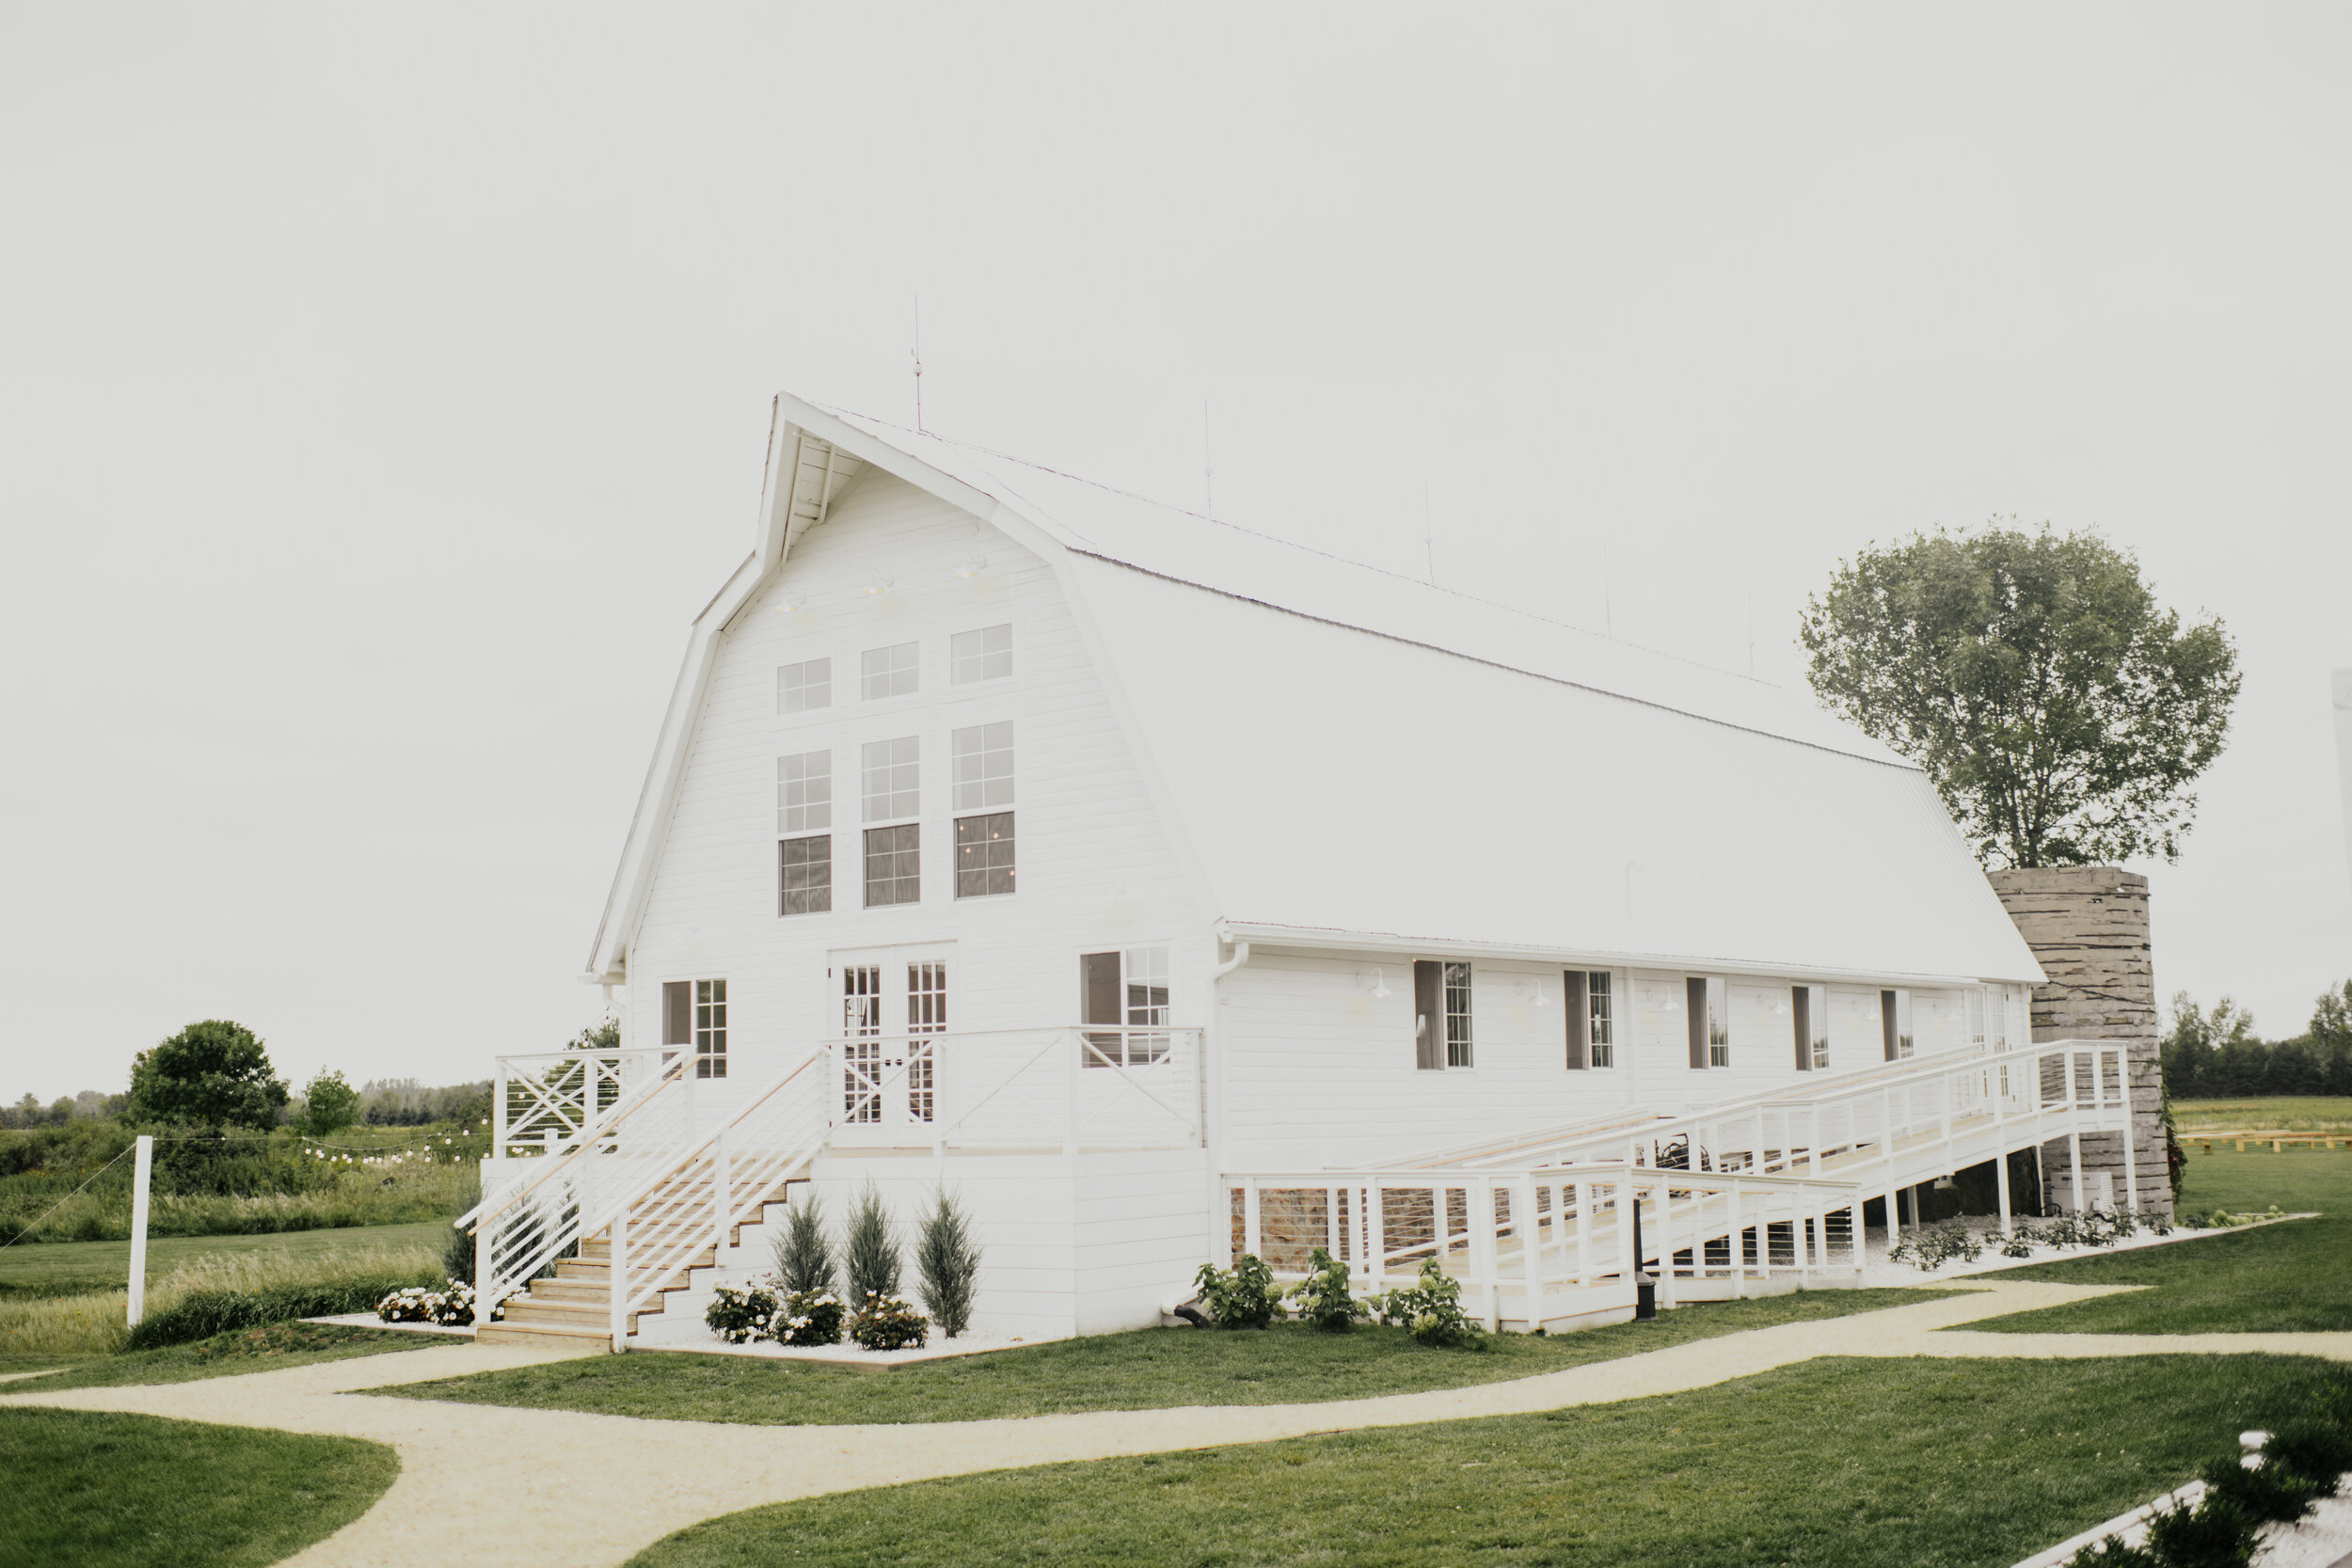 White modern farmhouse-style wedding venue with a covered patio and large windows, set in a lush, green landscape under a clear sky. This venue is called Ivory North